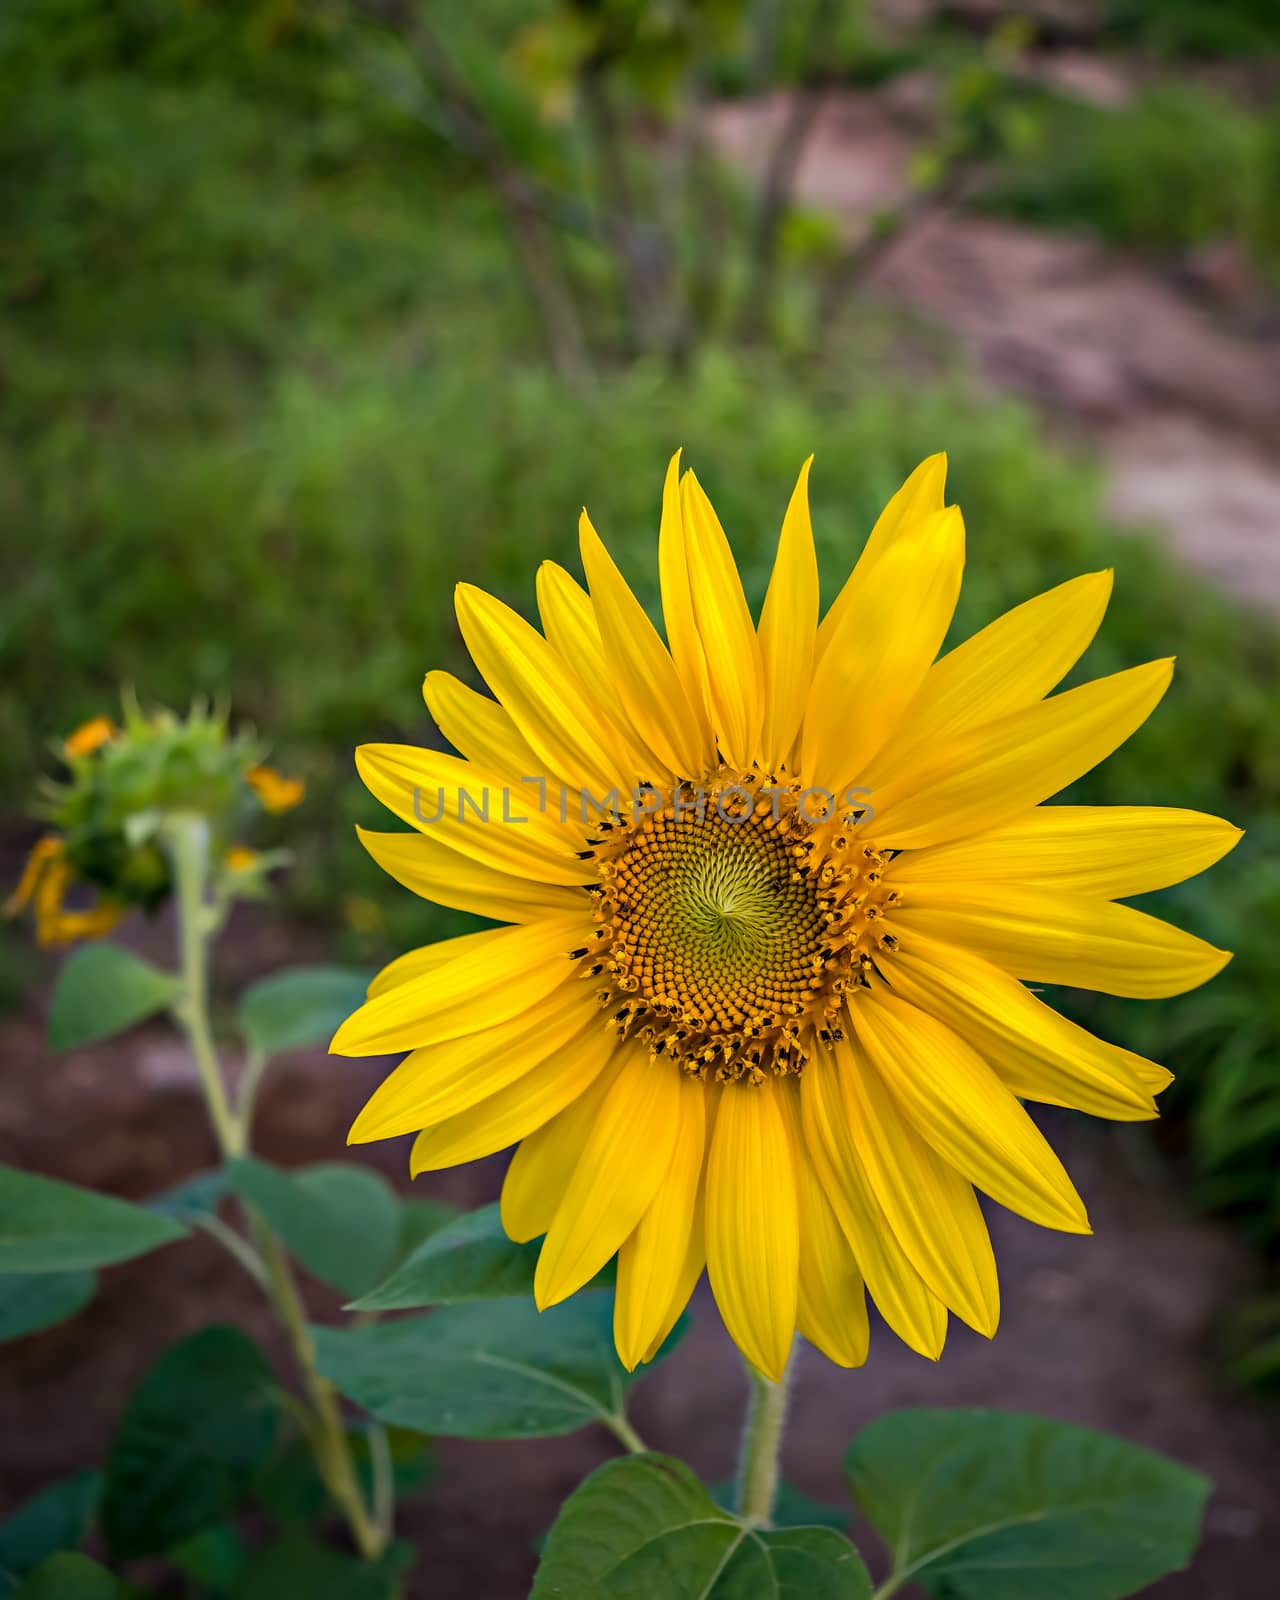 Close up, isolated  photograph of a Sunflower shinning in the evening sunlight. The scientific name is Helianthus. by lalam